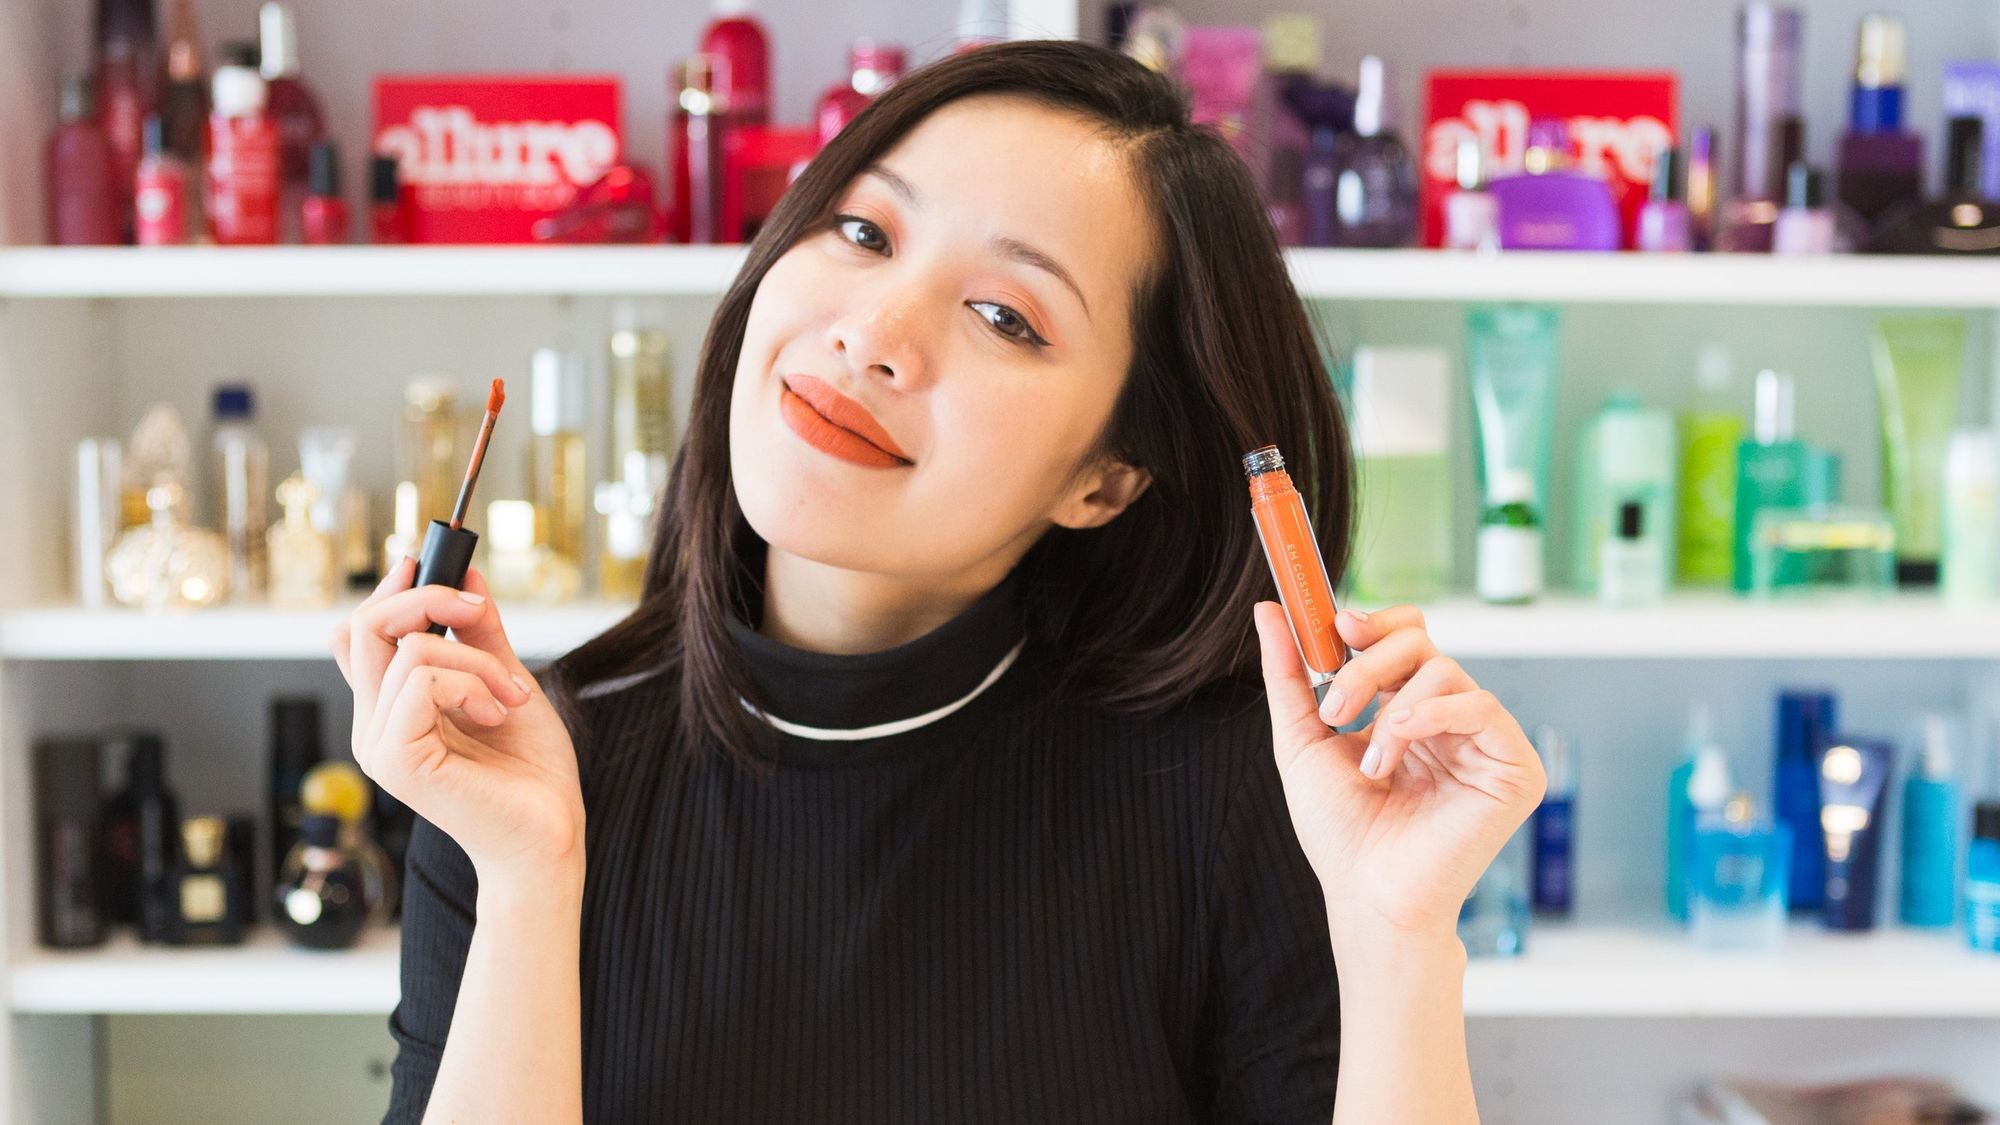 Michelle Phan showing her own beauty brand EM Cosmetics.